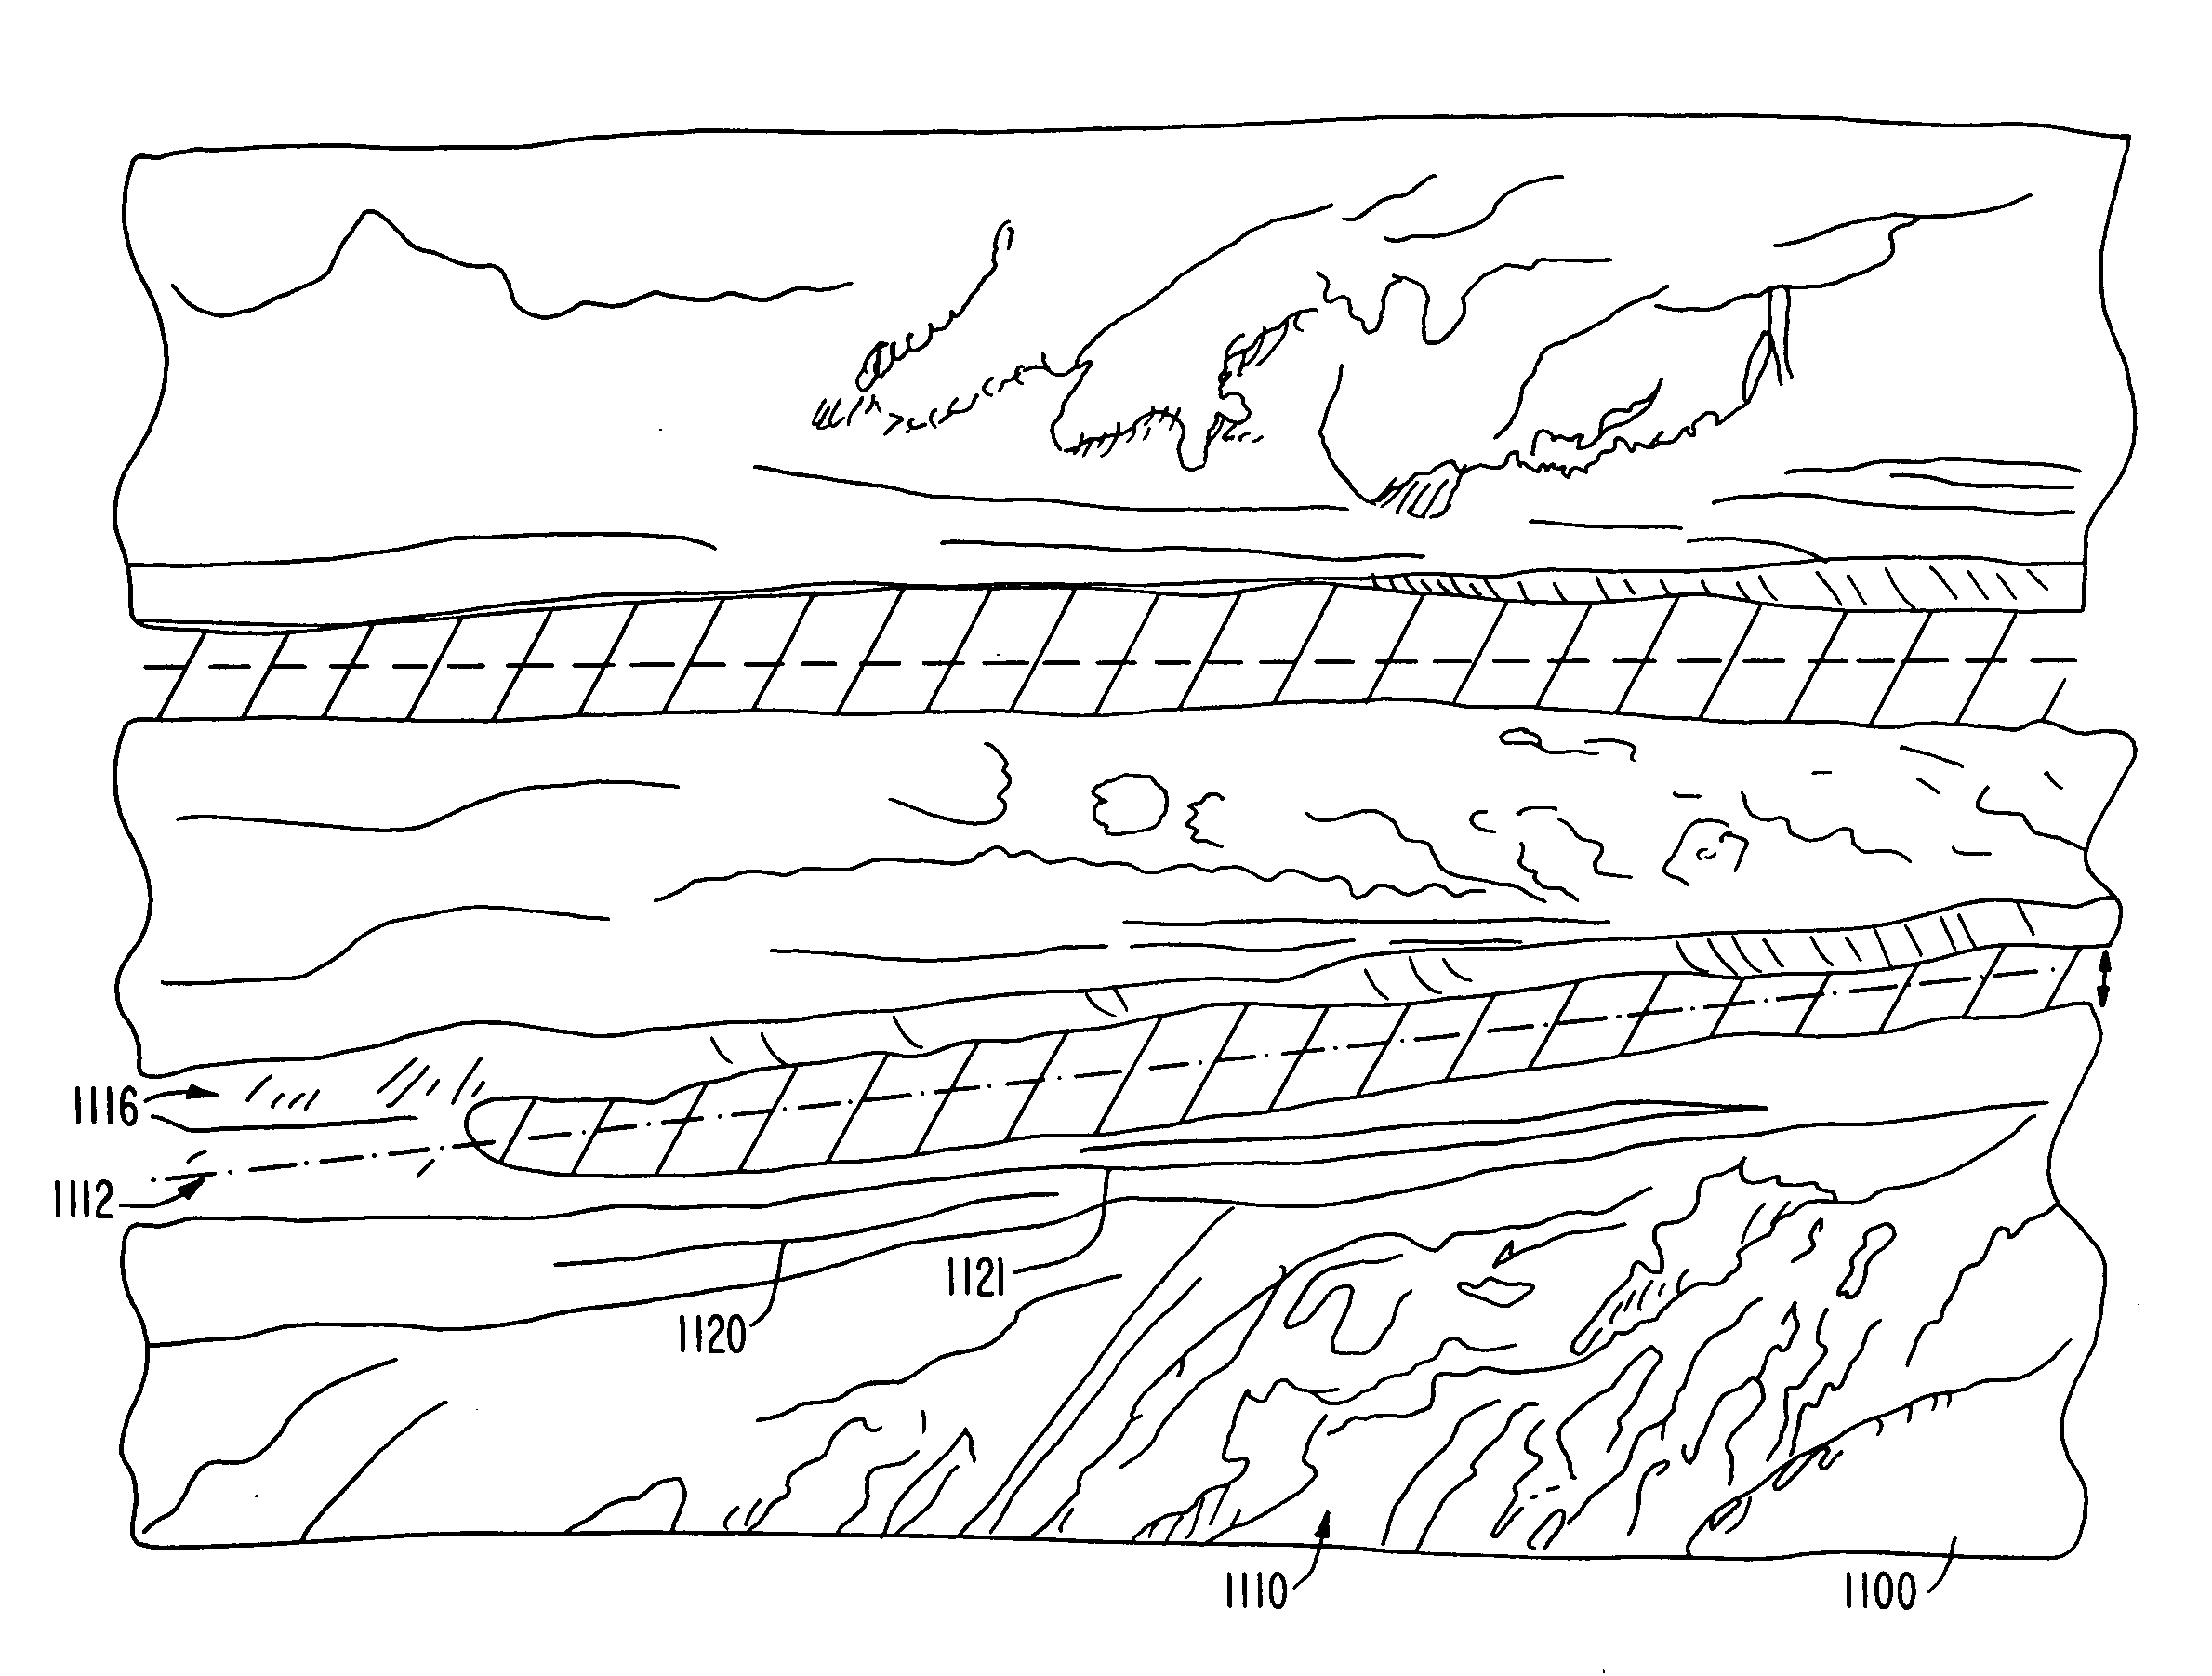 Accelerated steel cutting methods and machines for implementing such methods